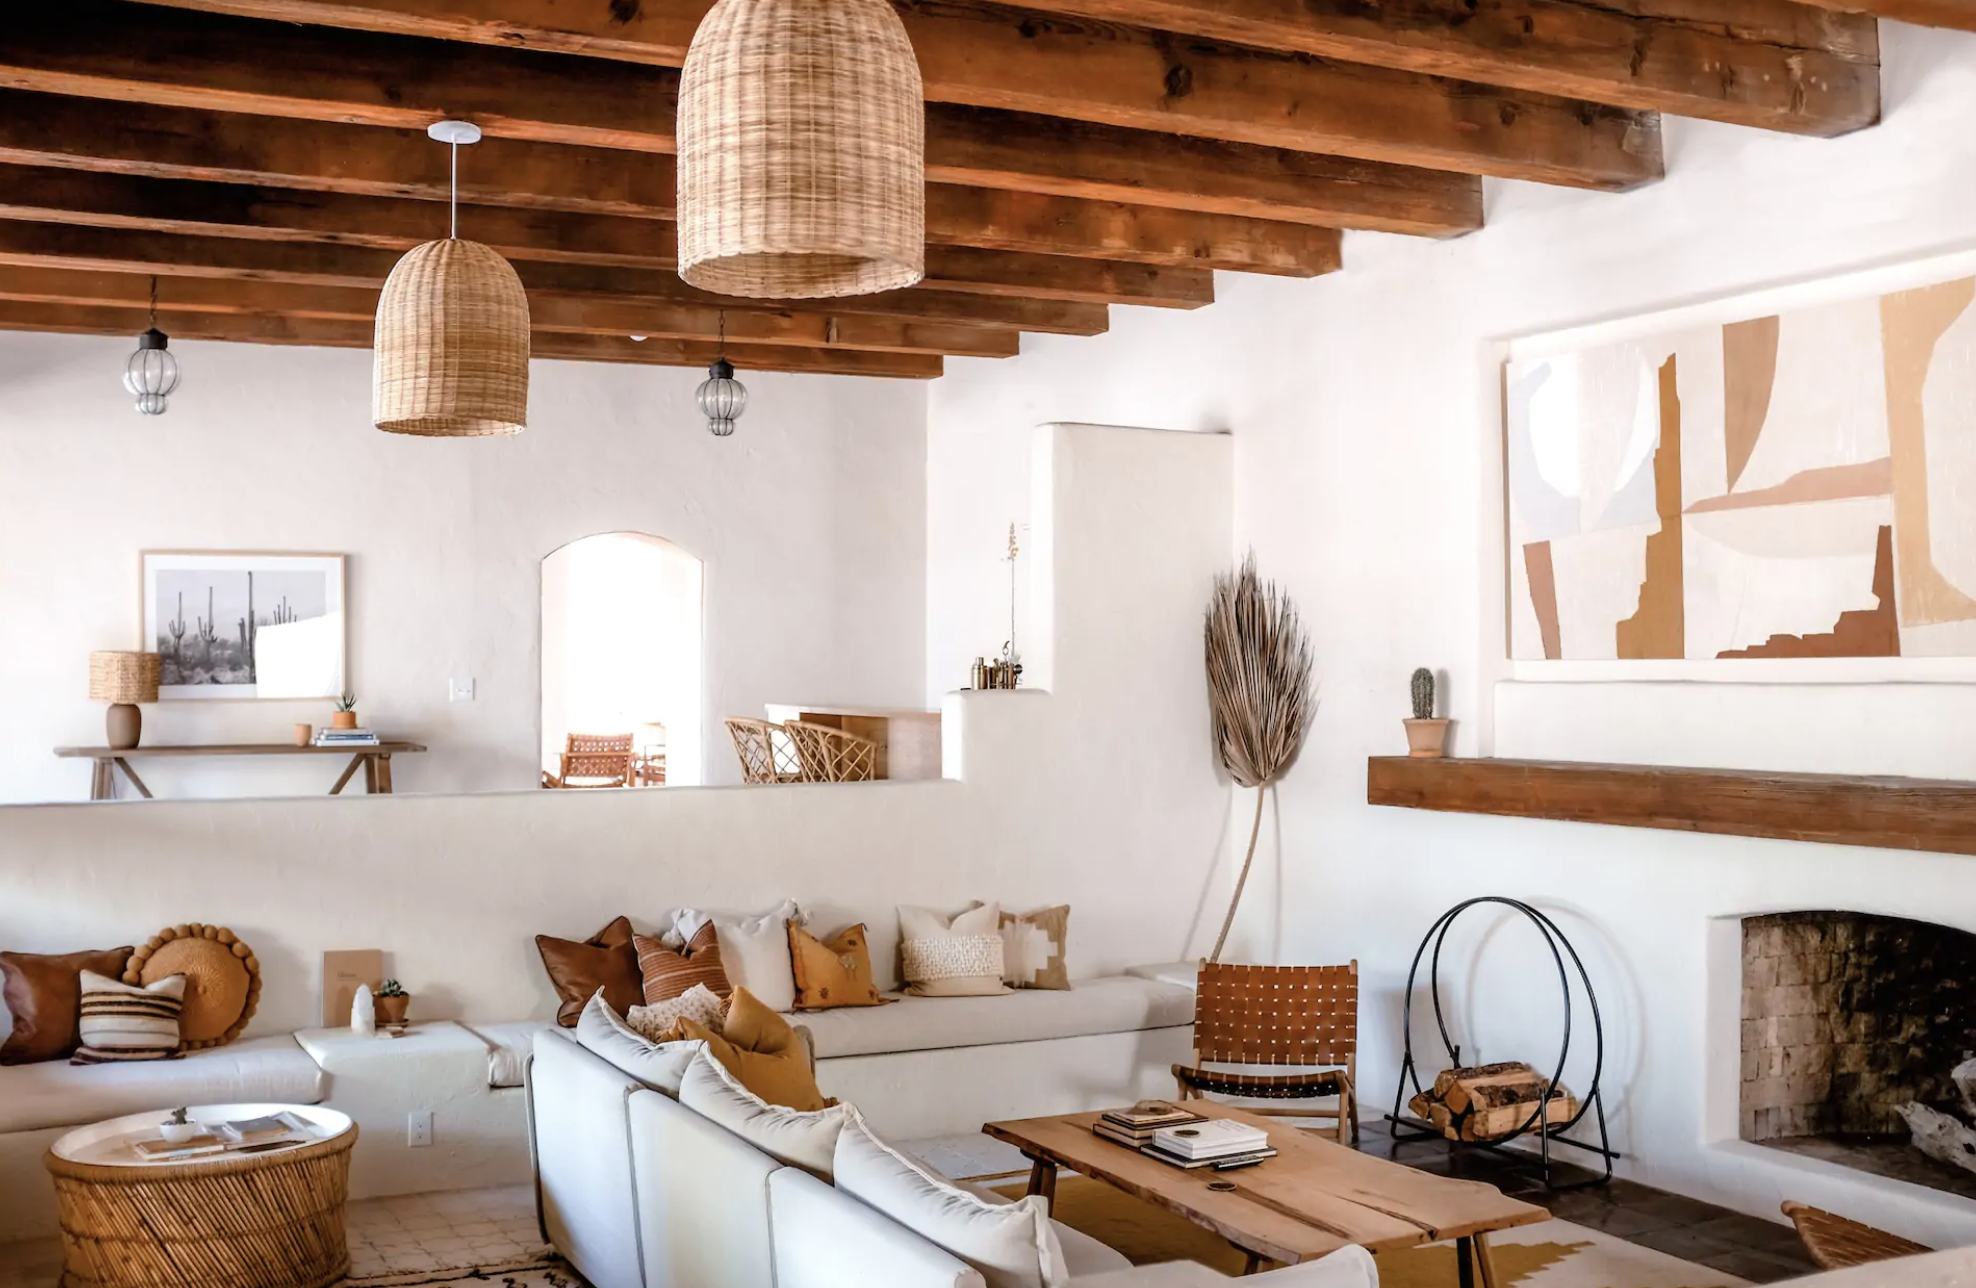 Cholla 01 | 20 Coolest Airbnbs in the United States